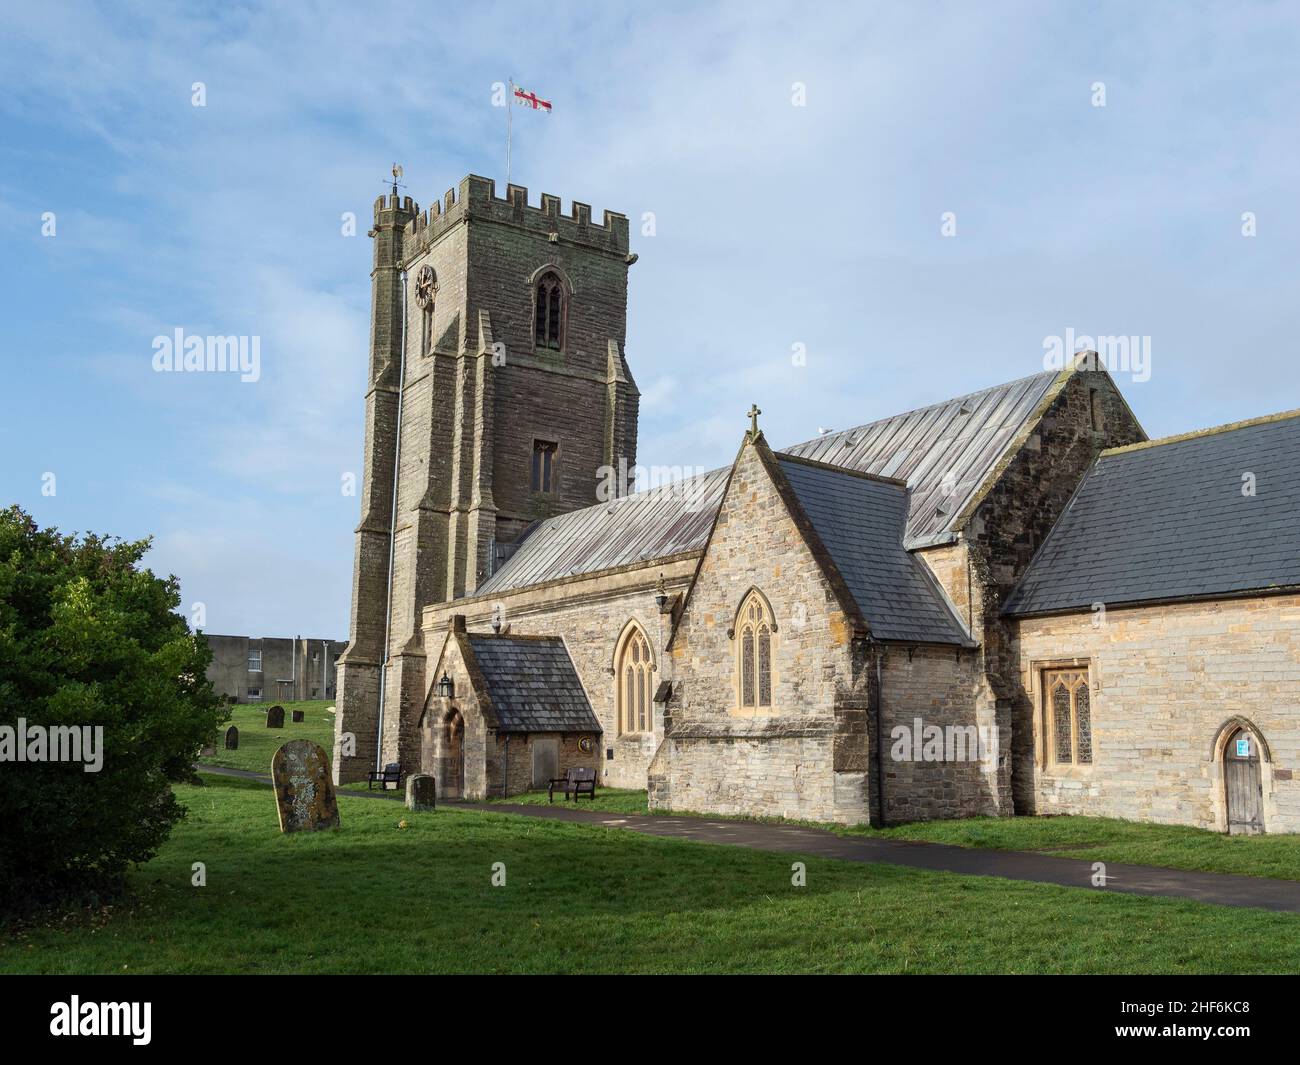 St Andrew's Church, Burnham-on-Sea, Somerset, England. The church is known for having leaning tower. Stock Photo